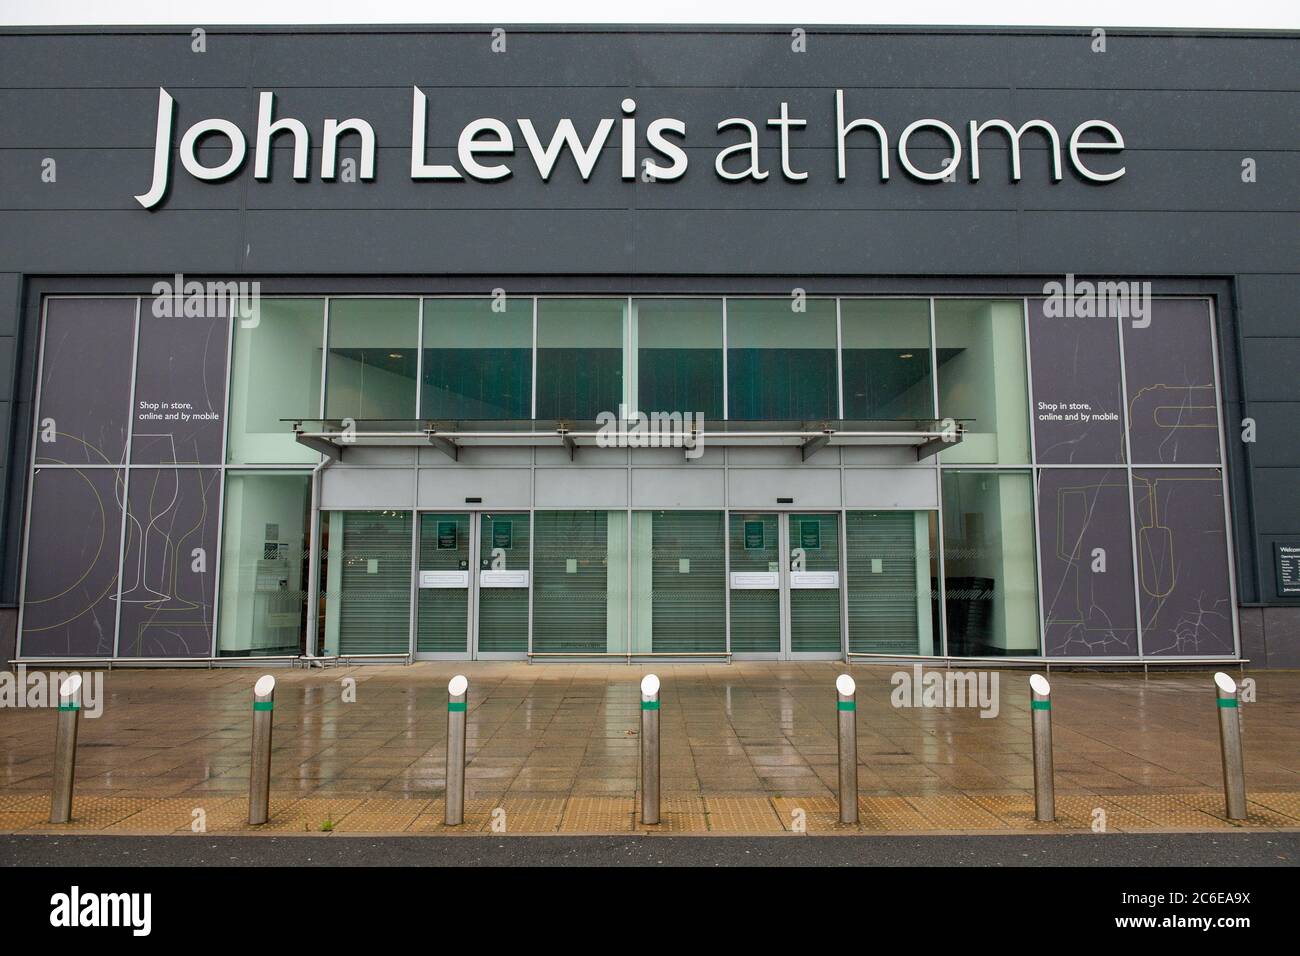 John Lewis At Home store in Tamworth, which is due to close as John Lewis said it will shut two full-size department stores in Birmingham and Watford, four At Home shops in Croydon, Newbury, Swindon and Tamworth, as well as two travel hub outlets at Heathrow and St Pancras. Stock Photo